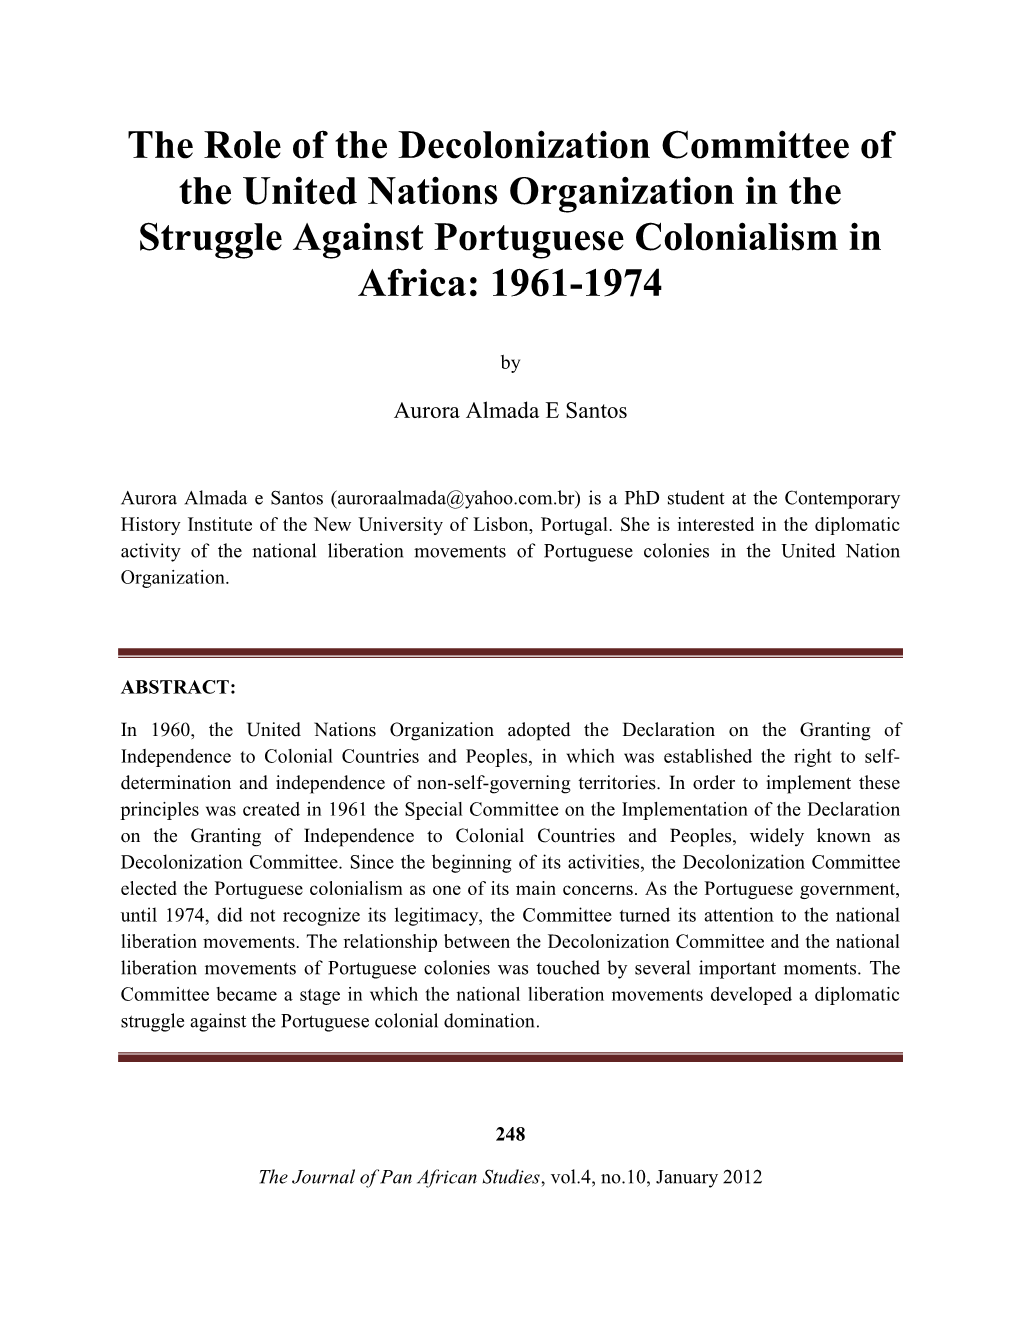 The Role of the Decolonization Committee of the United Nations Organization in the Struggle Against Portuguese Colonialism in Africa: 1961-1974